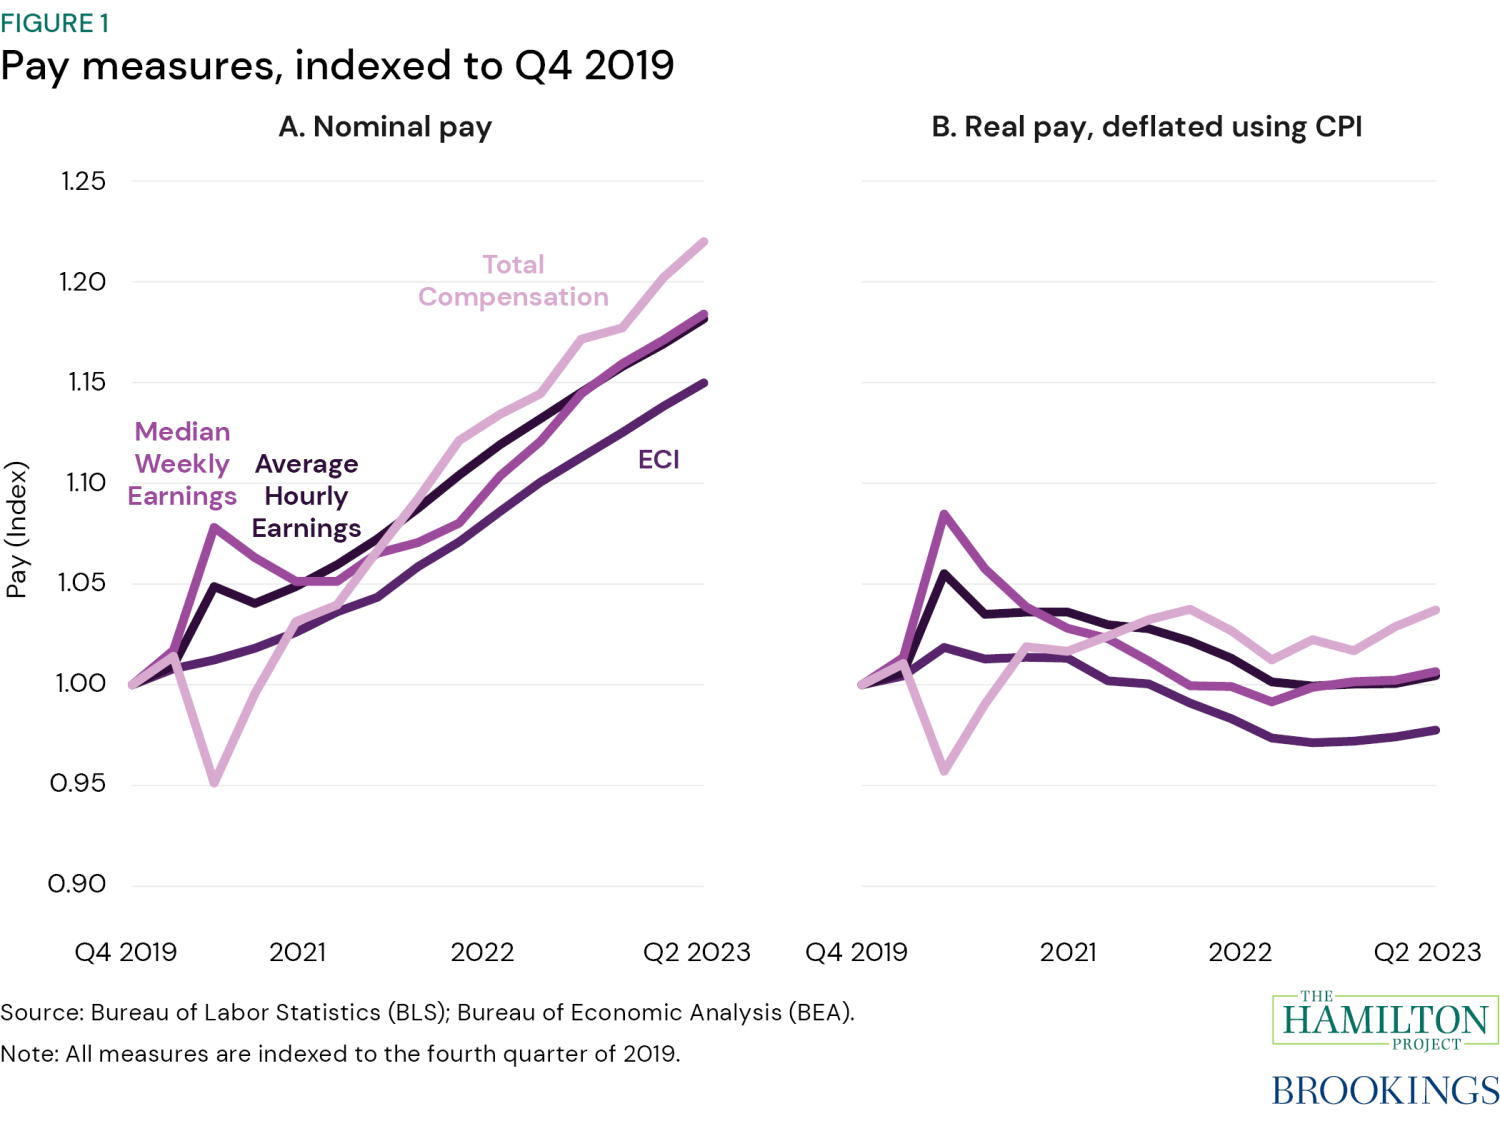 Figure 1: Take-home pay measures, indexed to Q4 2019, comparing nominal take-home pay and real take-home pay, deflated using CPI